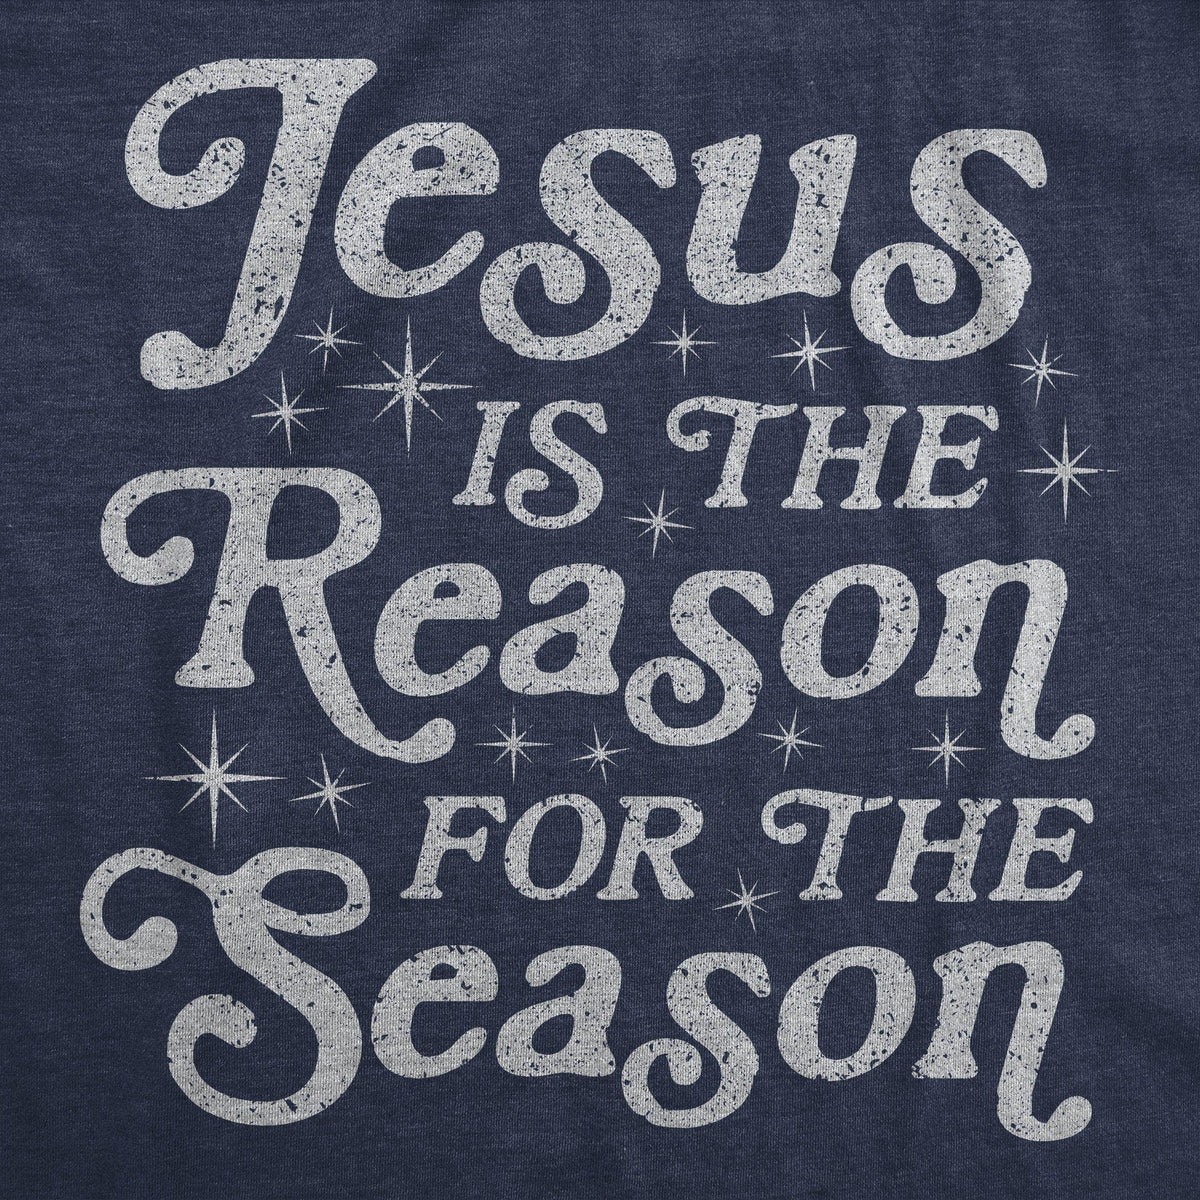 Jesus Is The Reason For The Season Men&#39;s Tshirt - Crazy Dog T-Shirts